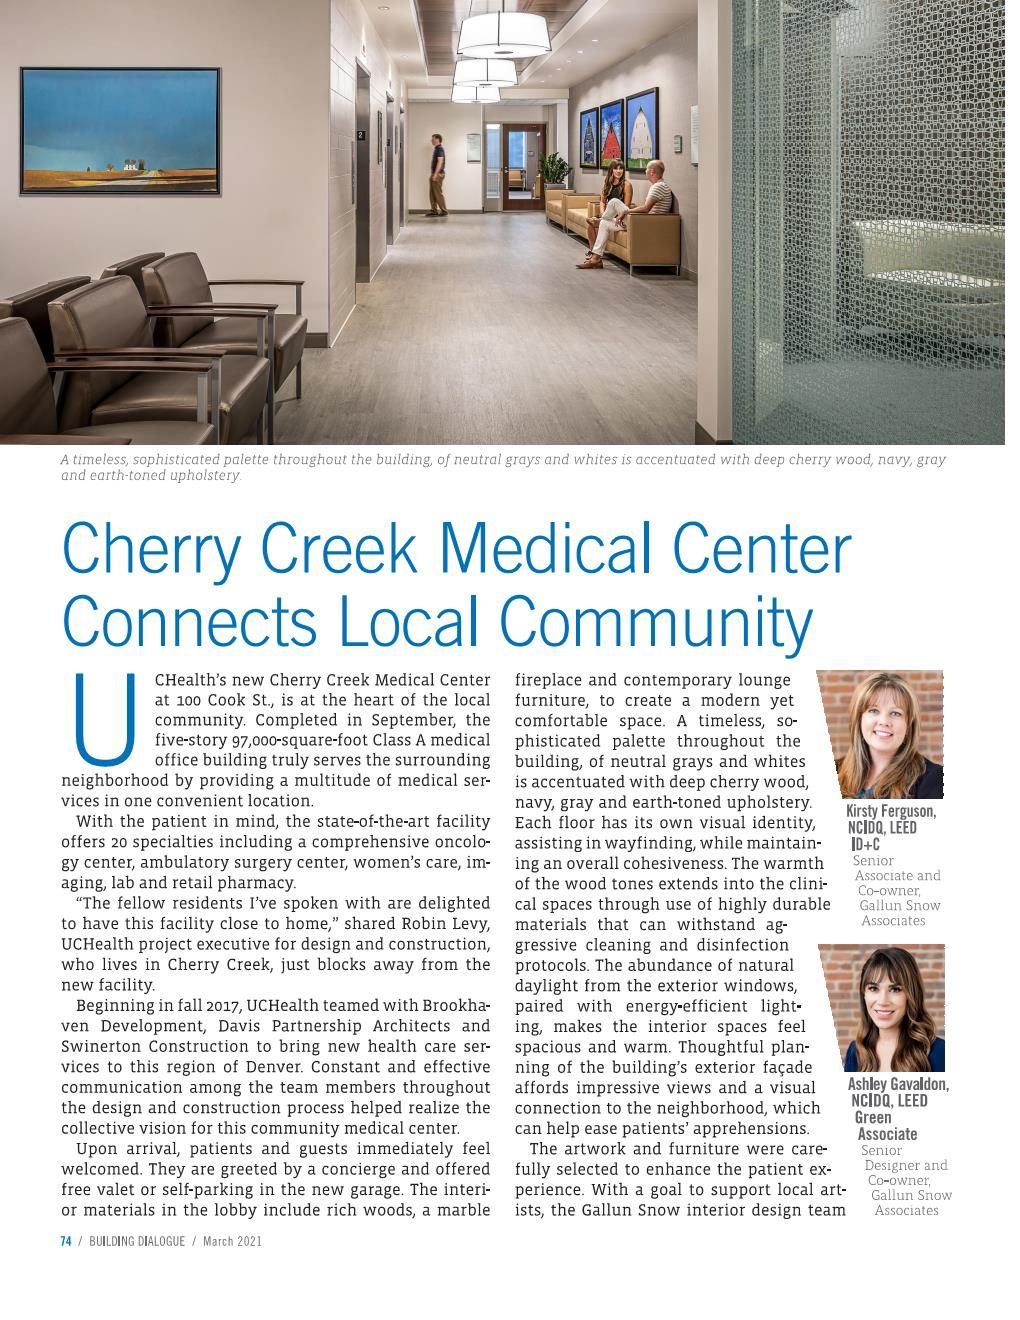 Cherry Creek Medical Center - Full Article Page 001.jpg